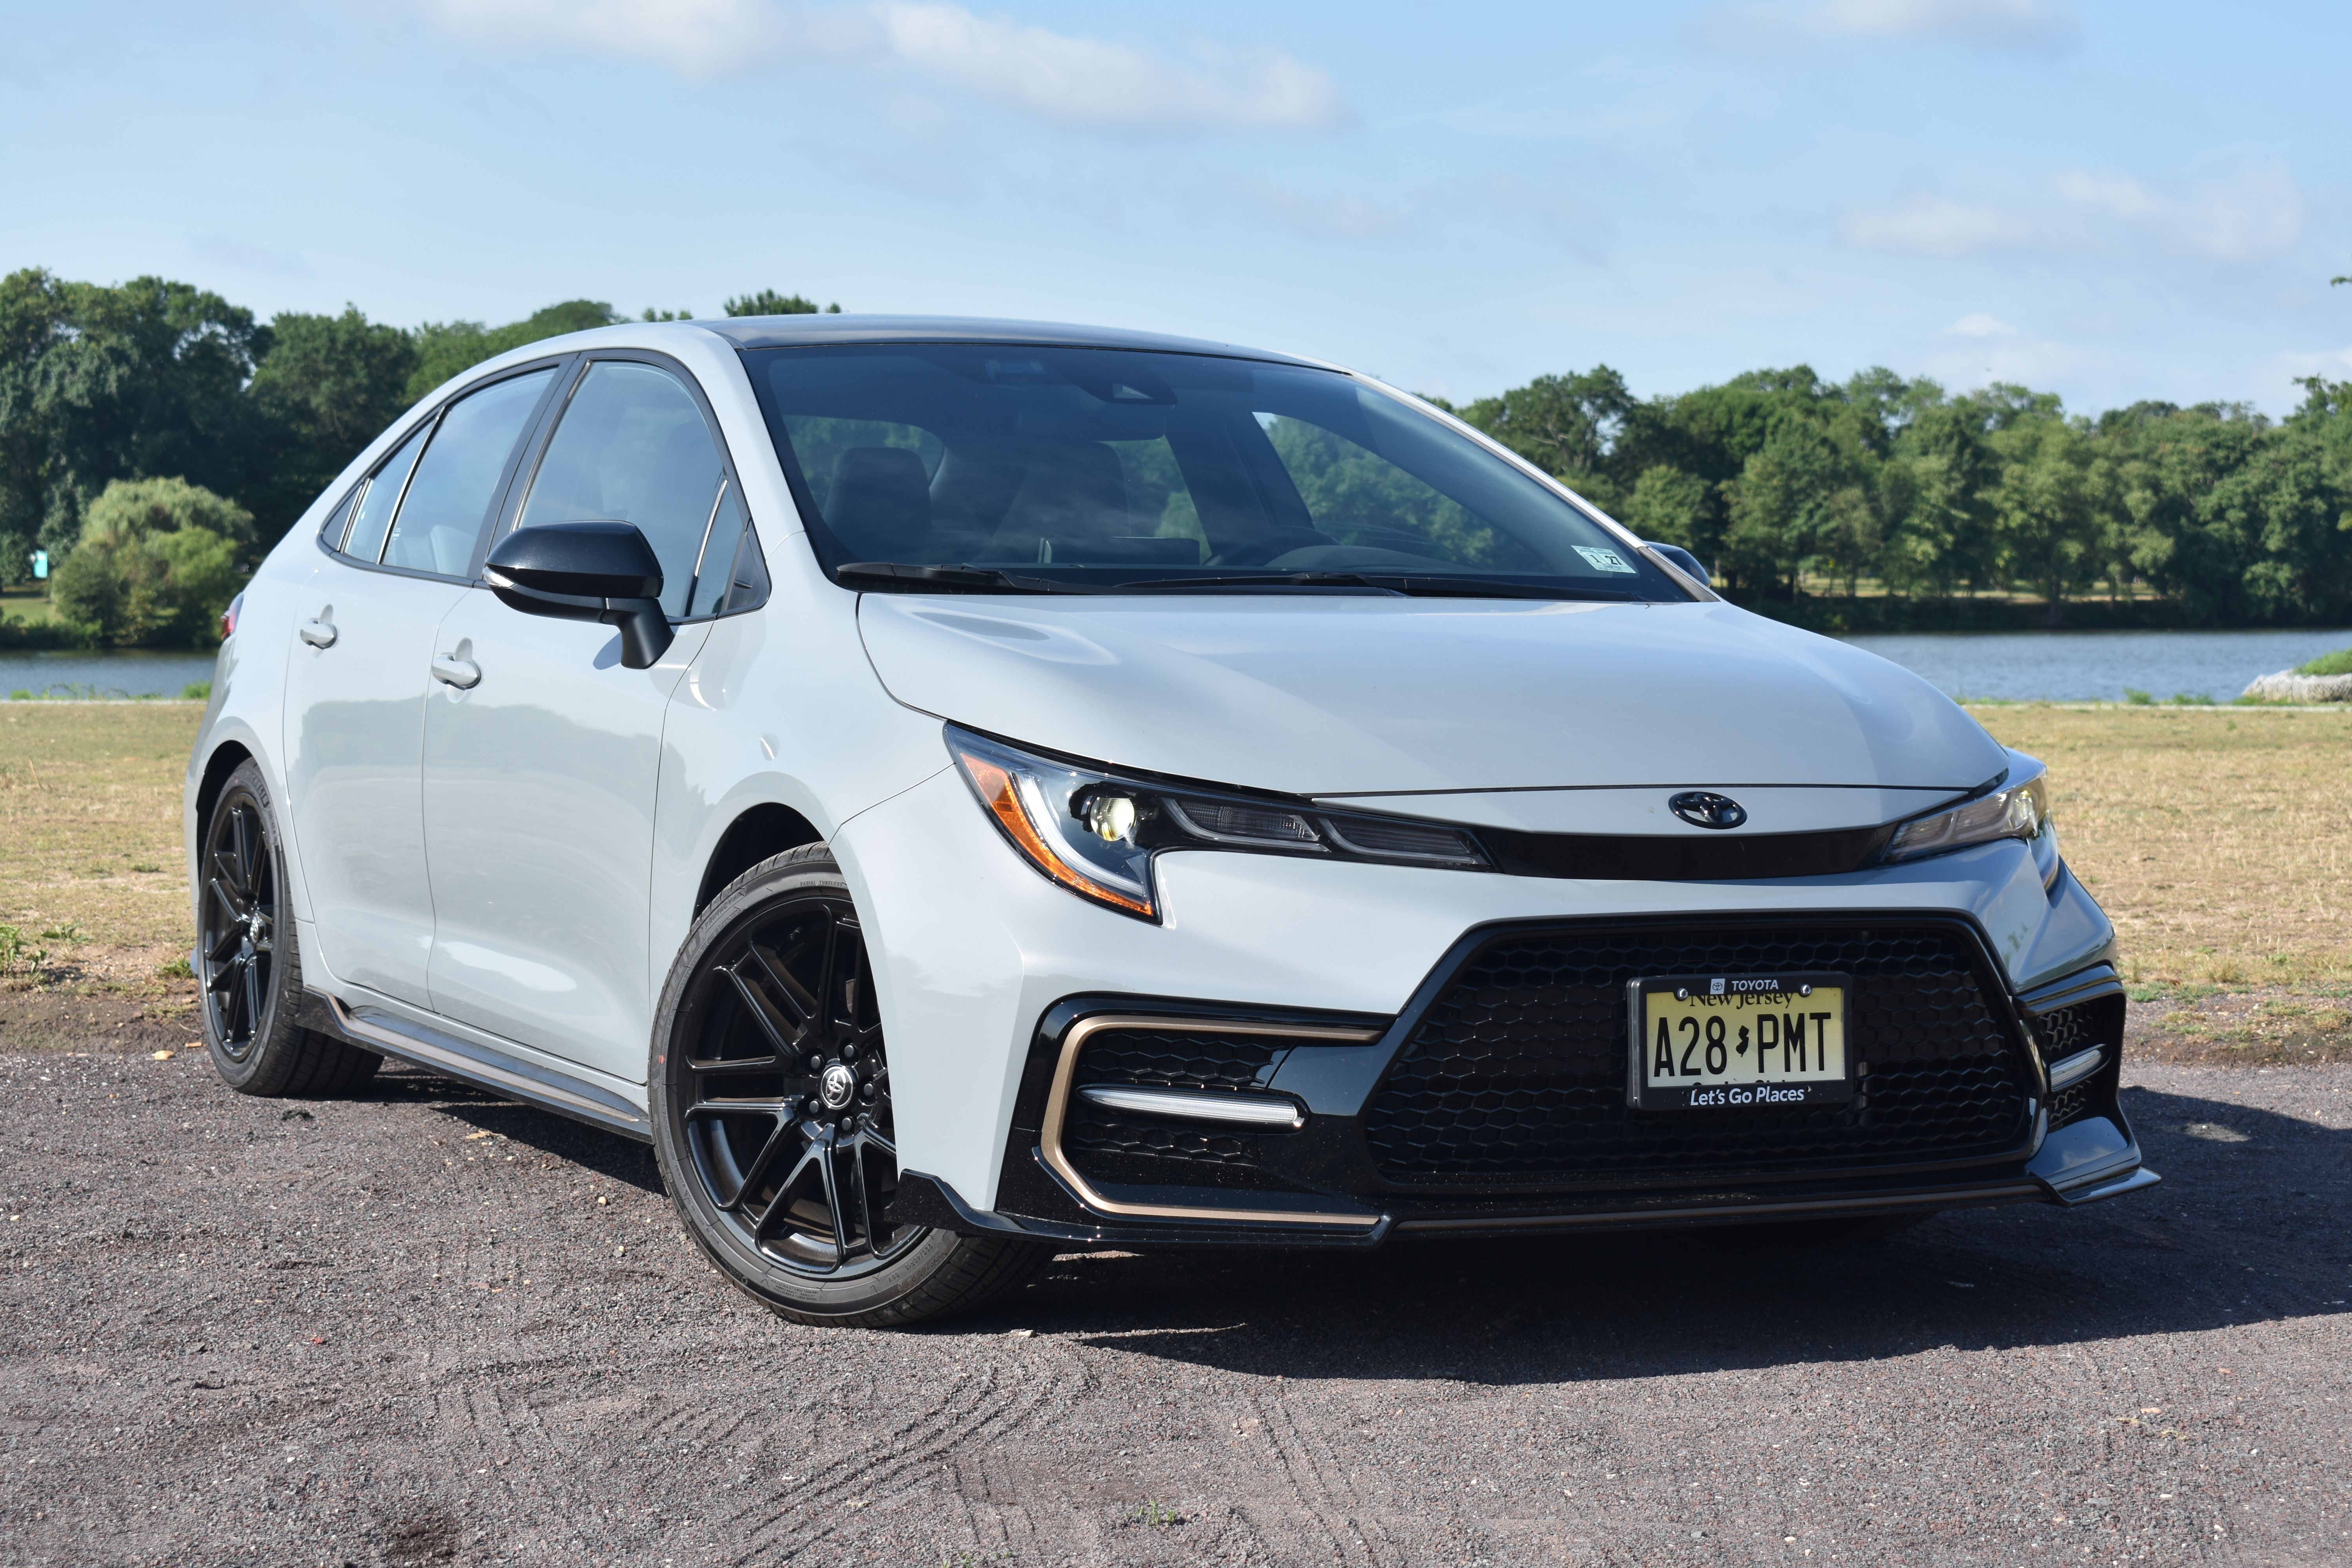 Toyota Corolla APEX Review: The Sporty Compact Car For The Enthusiast